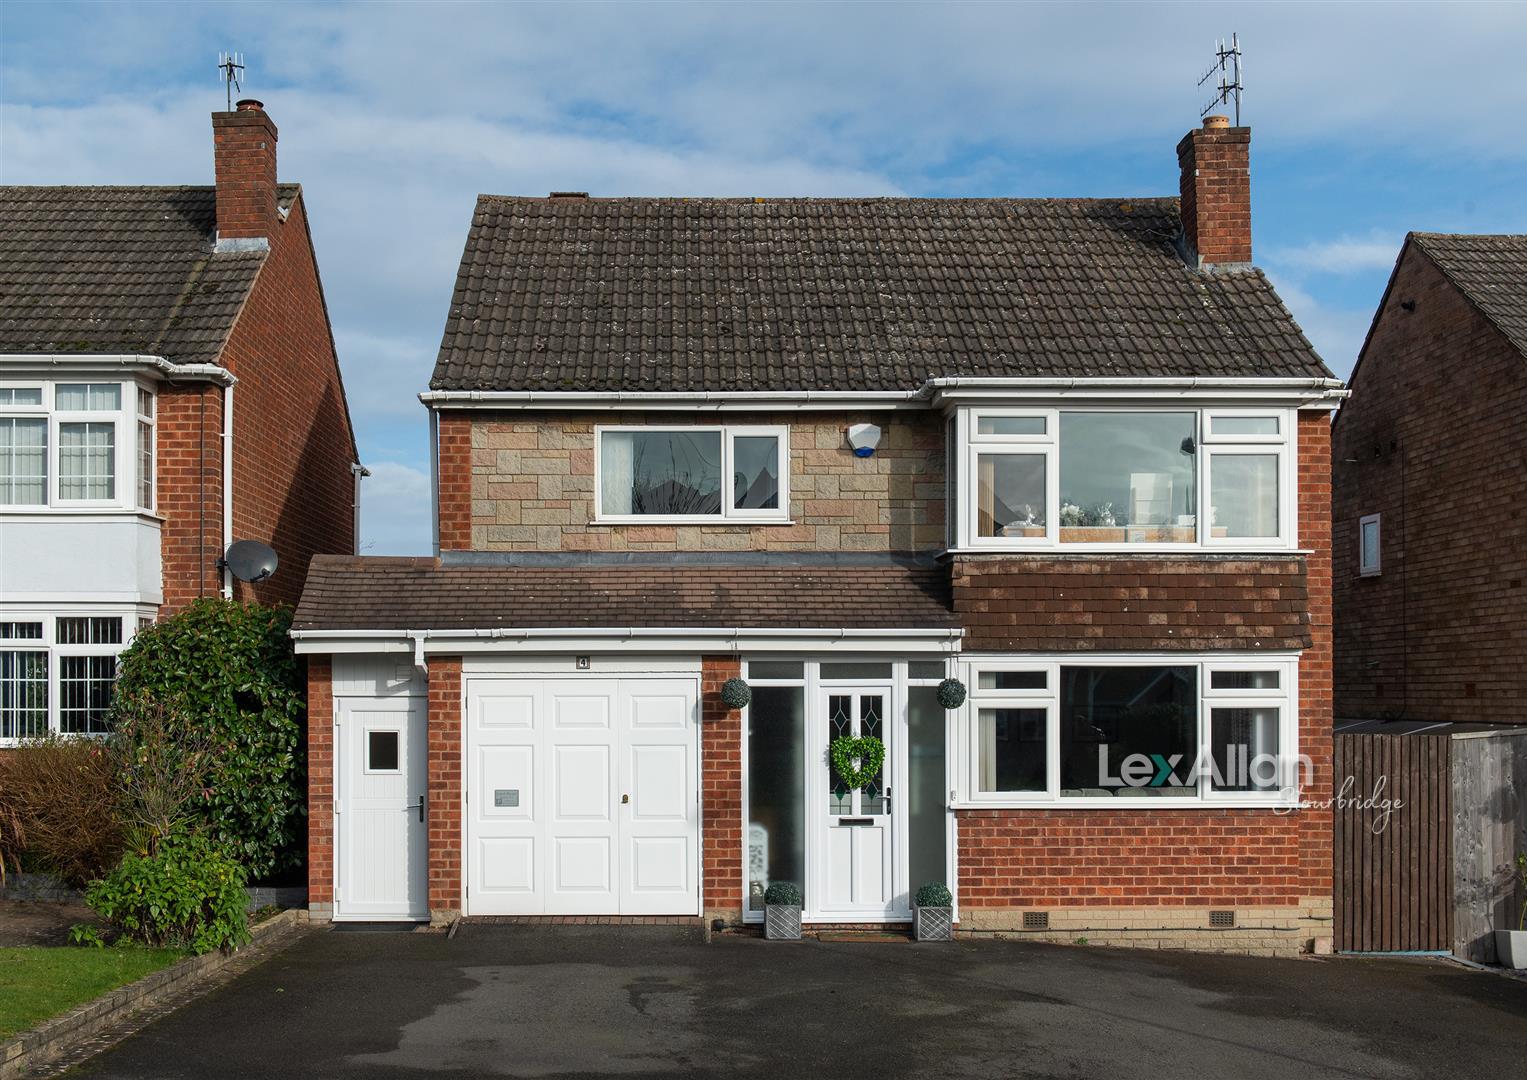 3 bed detached house for sale in Chaffinch Road, Stourbridge - Property Image 1